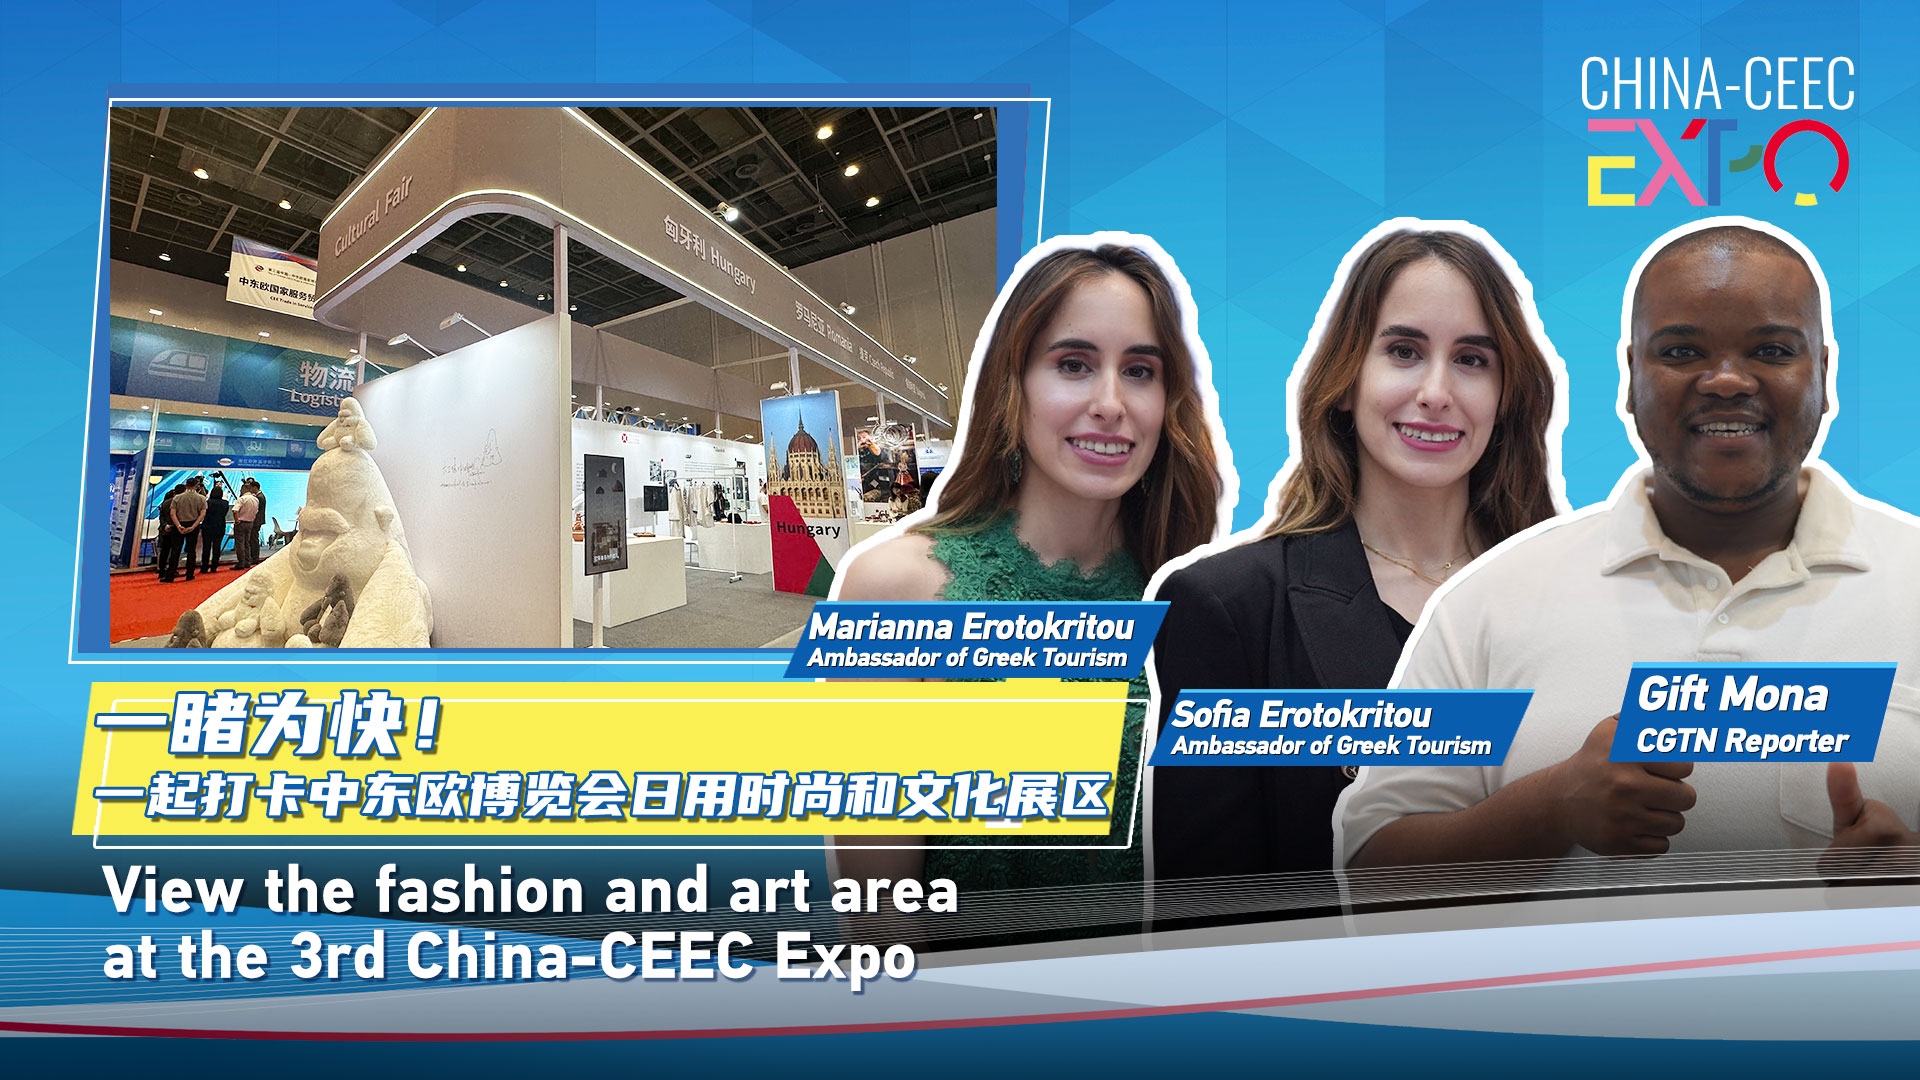 Live: View the fashion and art area at the 3rd China-CEEC Expo